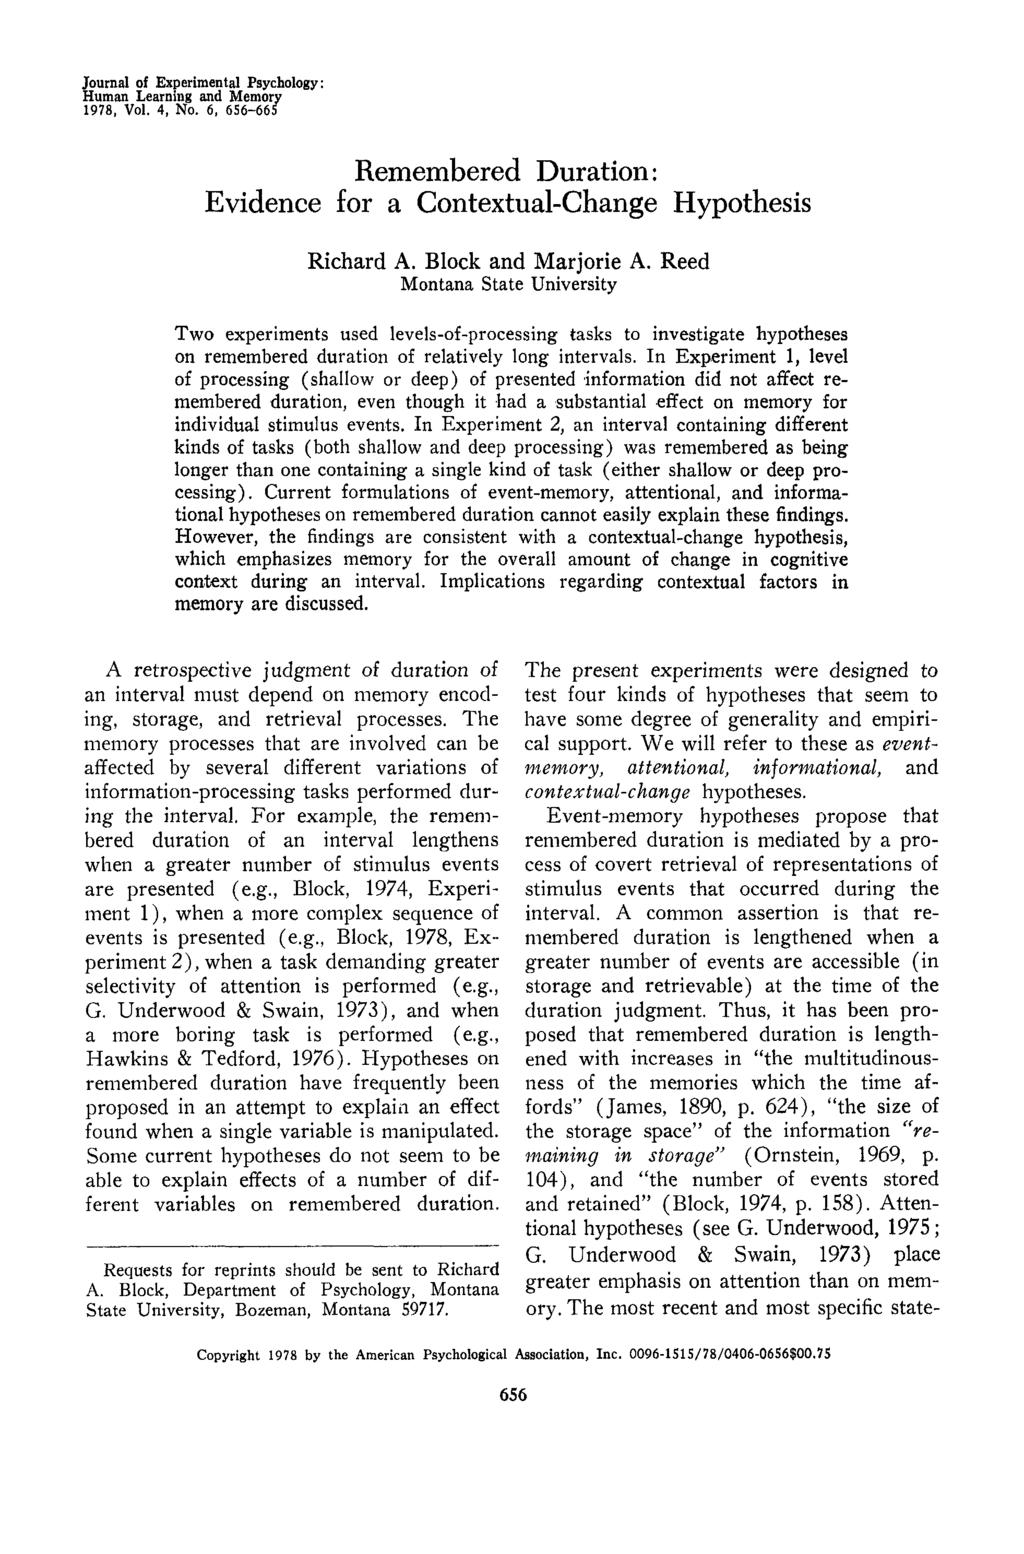 Journal of Experimental Psychology: Human Learning and emory 1978, Vol. 4, No. 6, 656-665 Remembered Duration: Evidence for a Contextual-Change Hypothesis Richard A. Block and arjorie A.